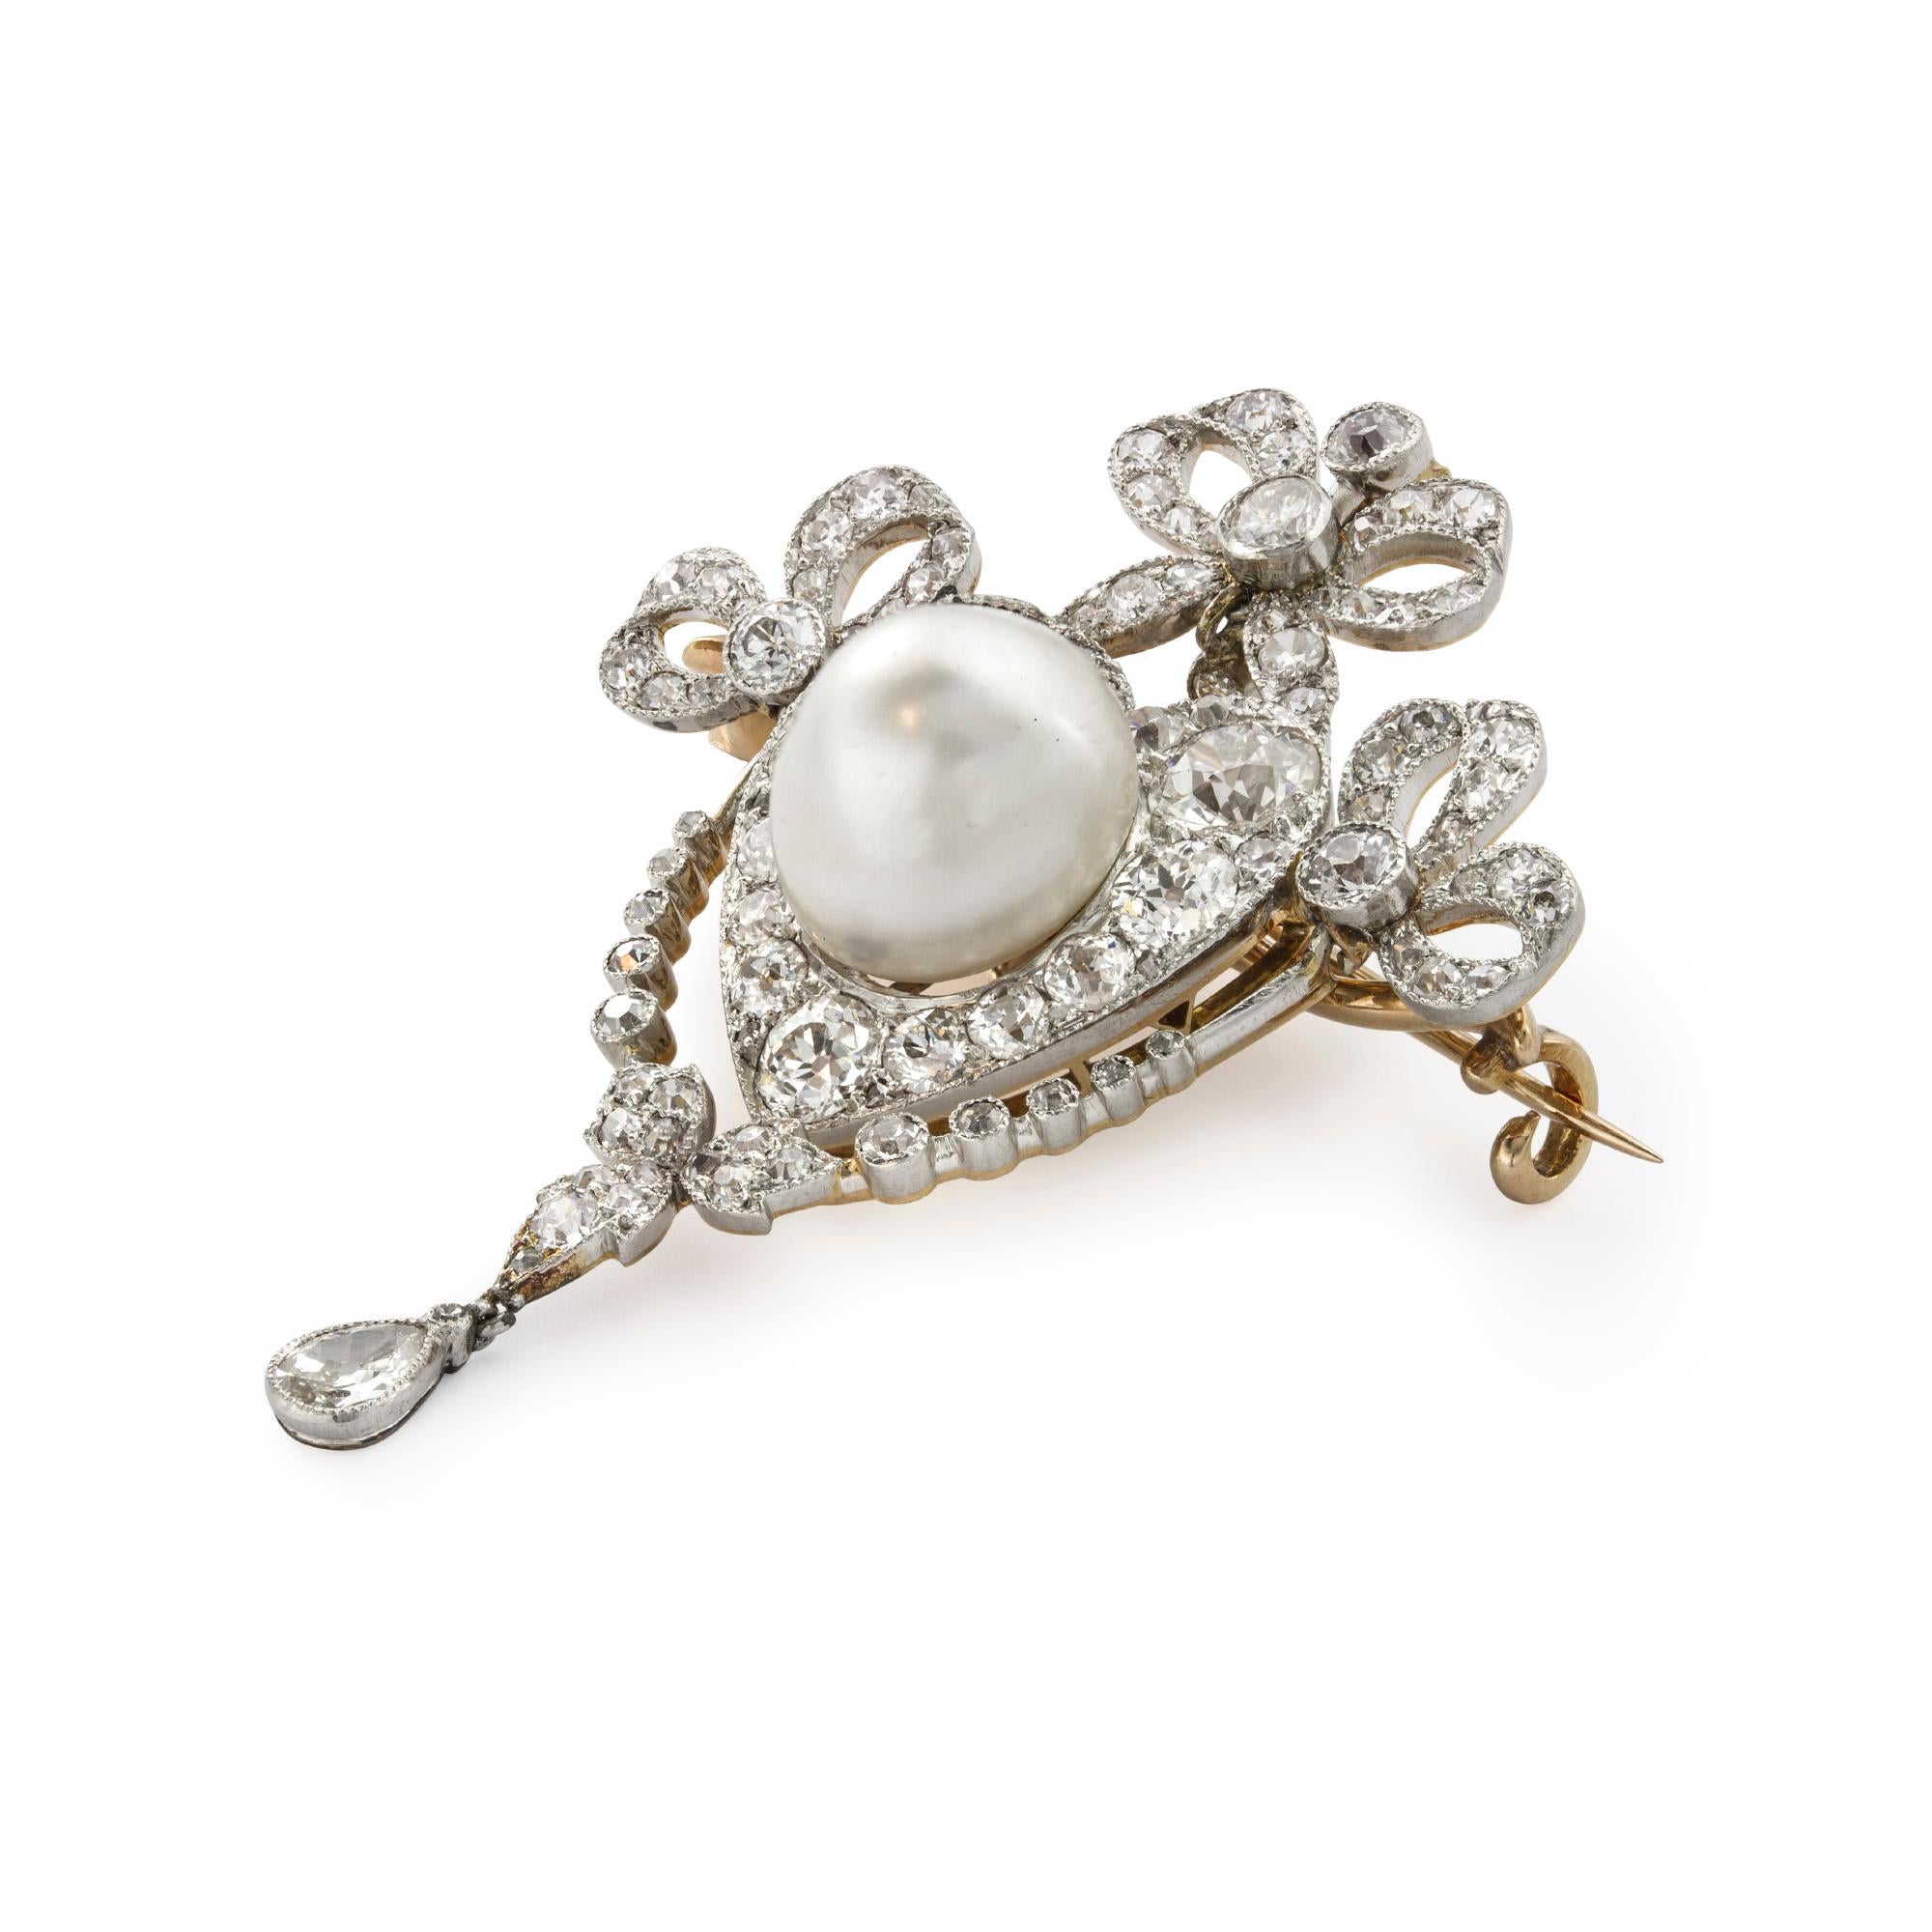 An Edwardian pearl and diamond brooch, the brooch with a diamond-set ribbon bow surmount, set to the centre with a pearl within a graduating old-cut diamond-set heart-shape cluster, the natural pearl measuring approximately 10.1 x 9.6mm dropping a